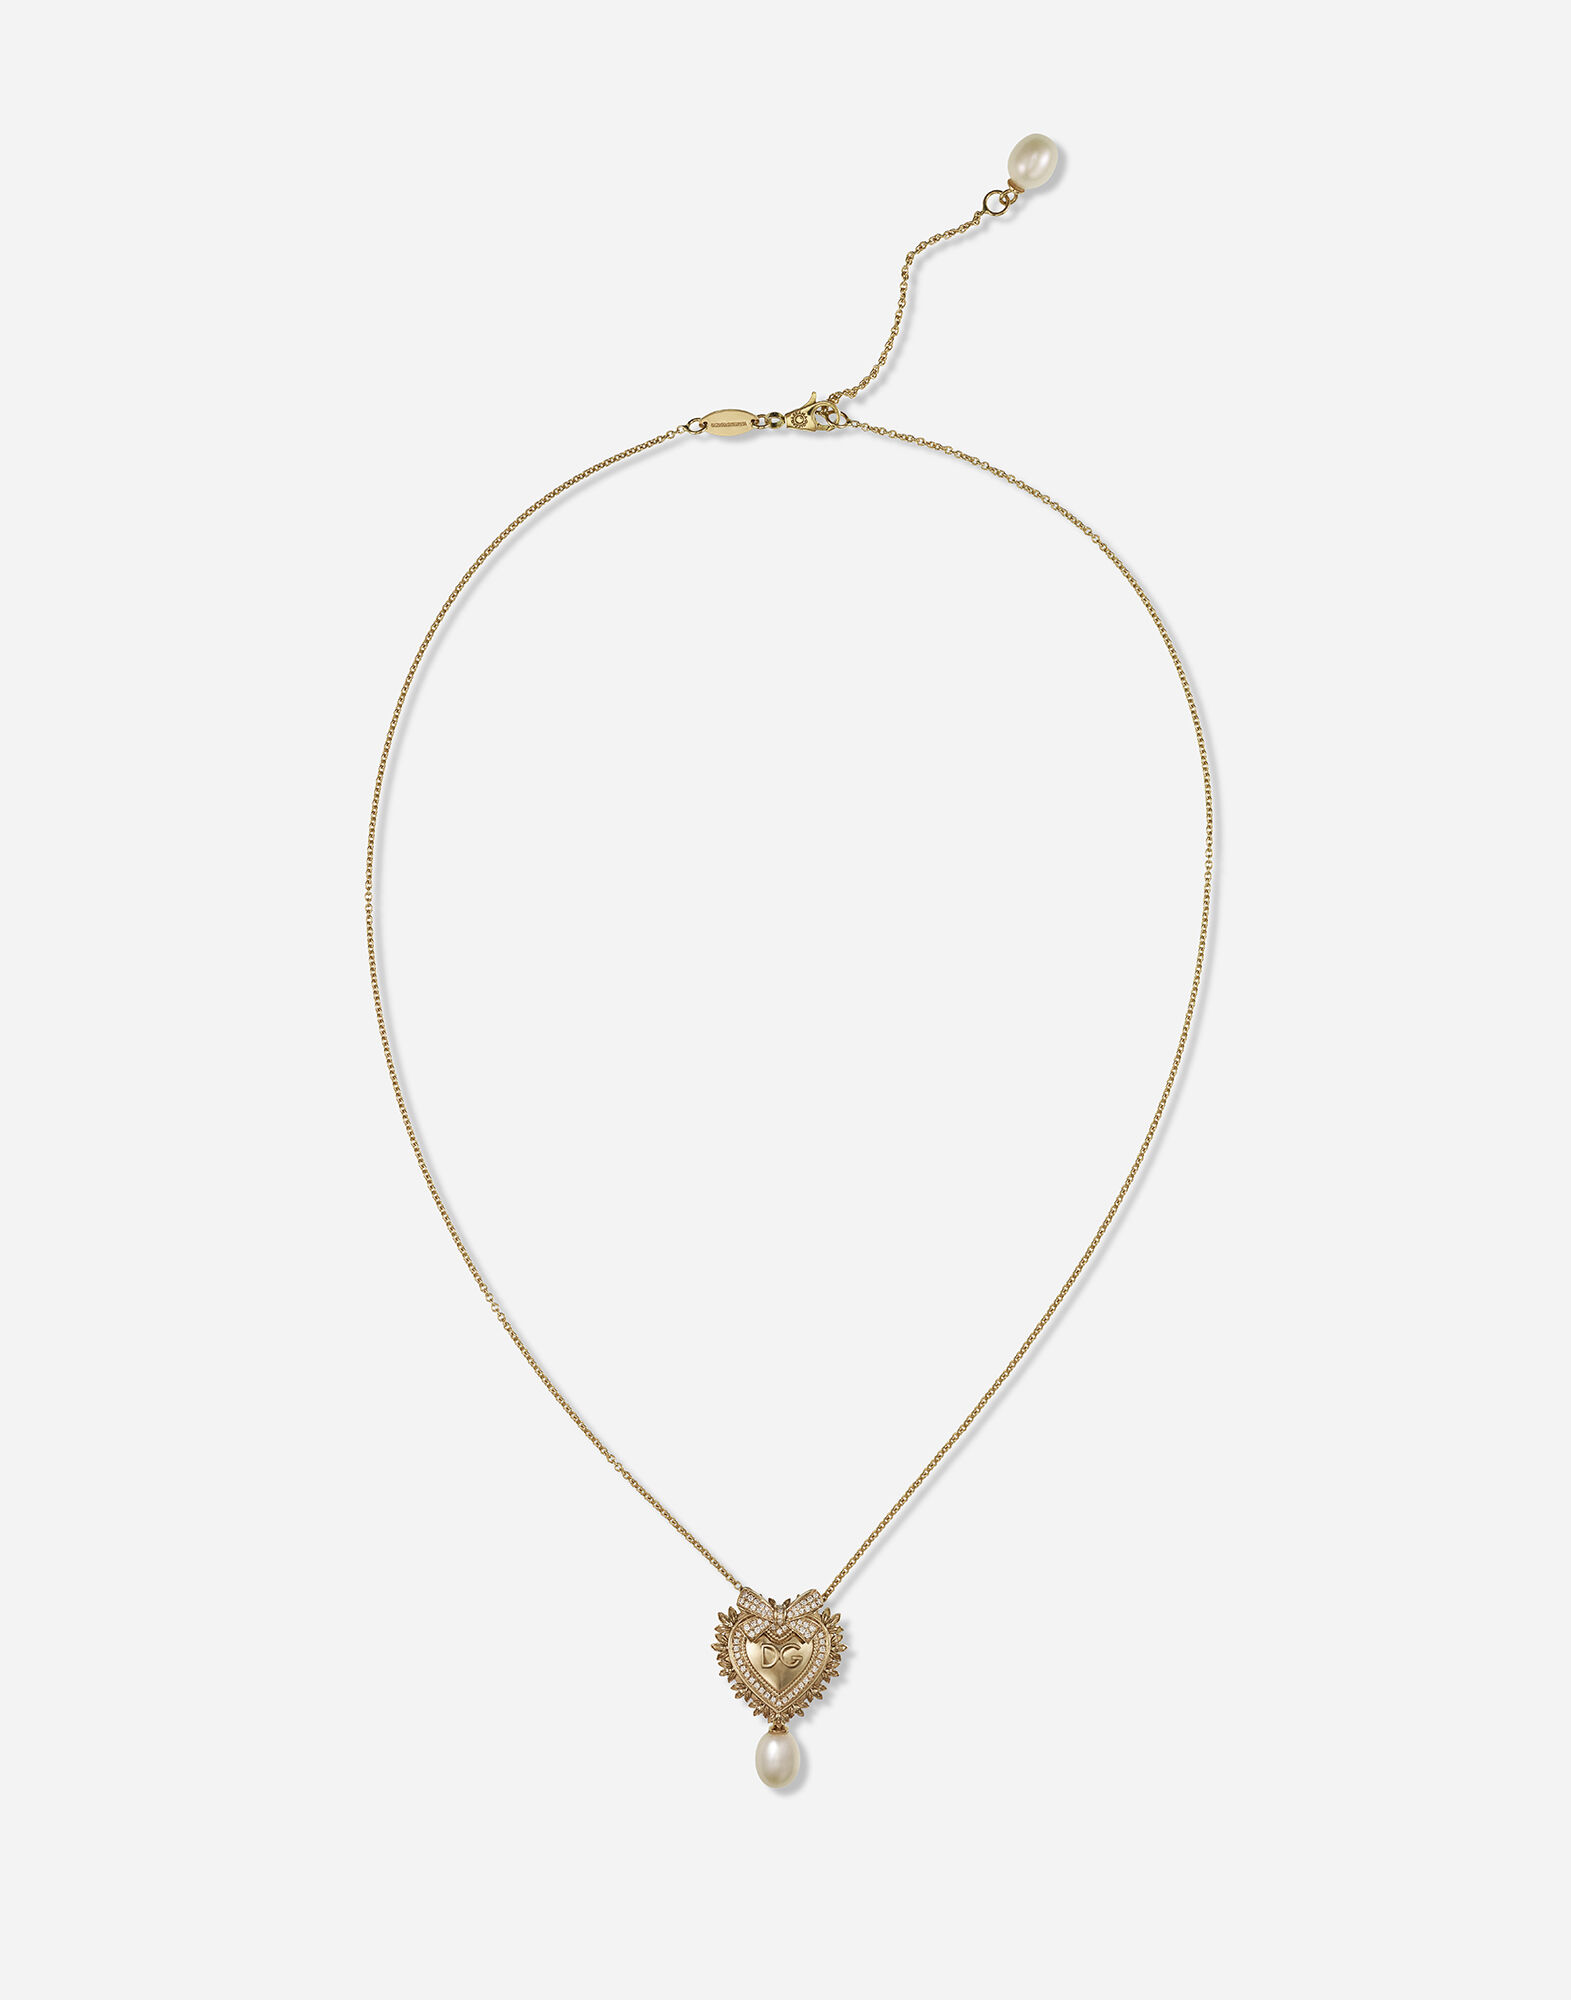 Dolce & Gabbana Devotion necklace in yellow gold with diamonds and pearls Gold WRQA1GWQC01